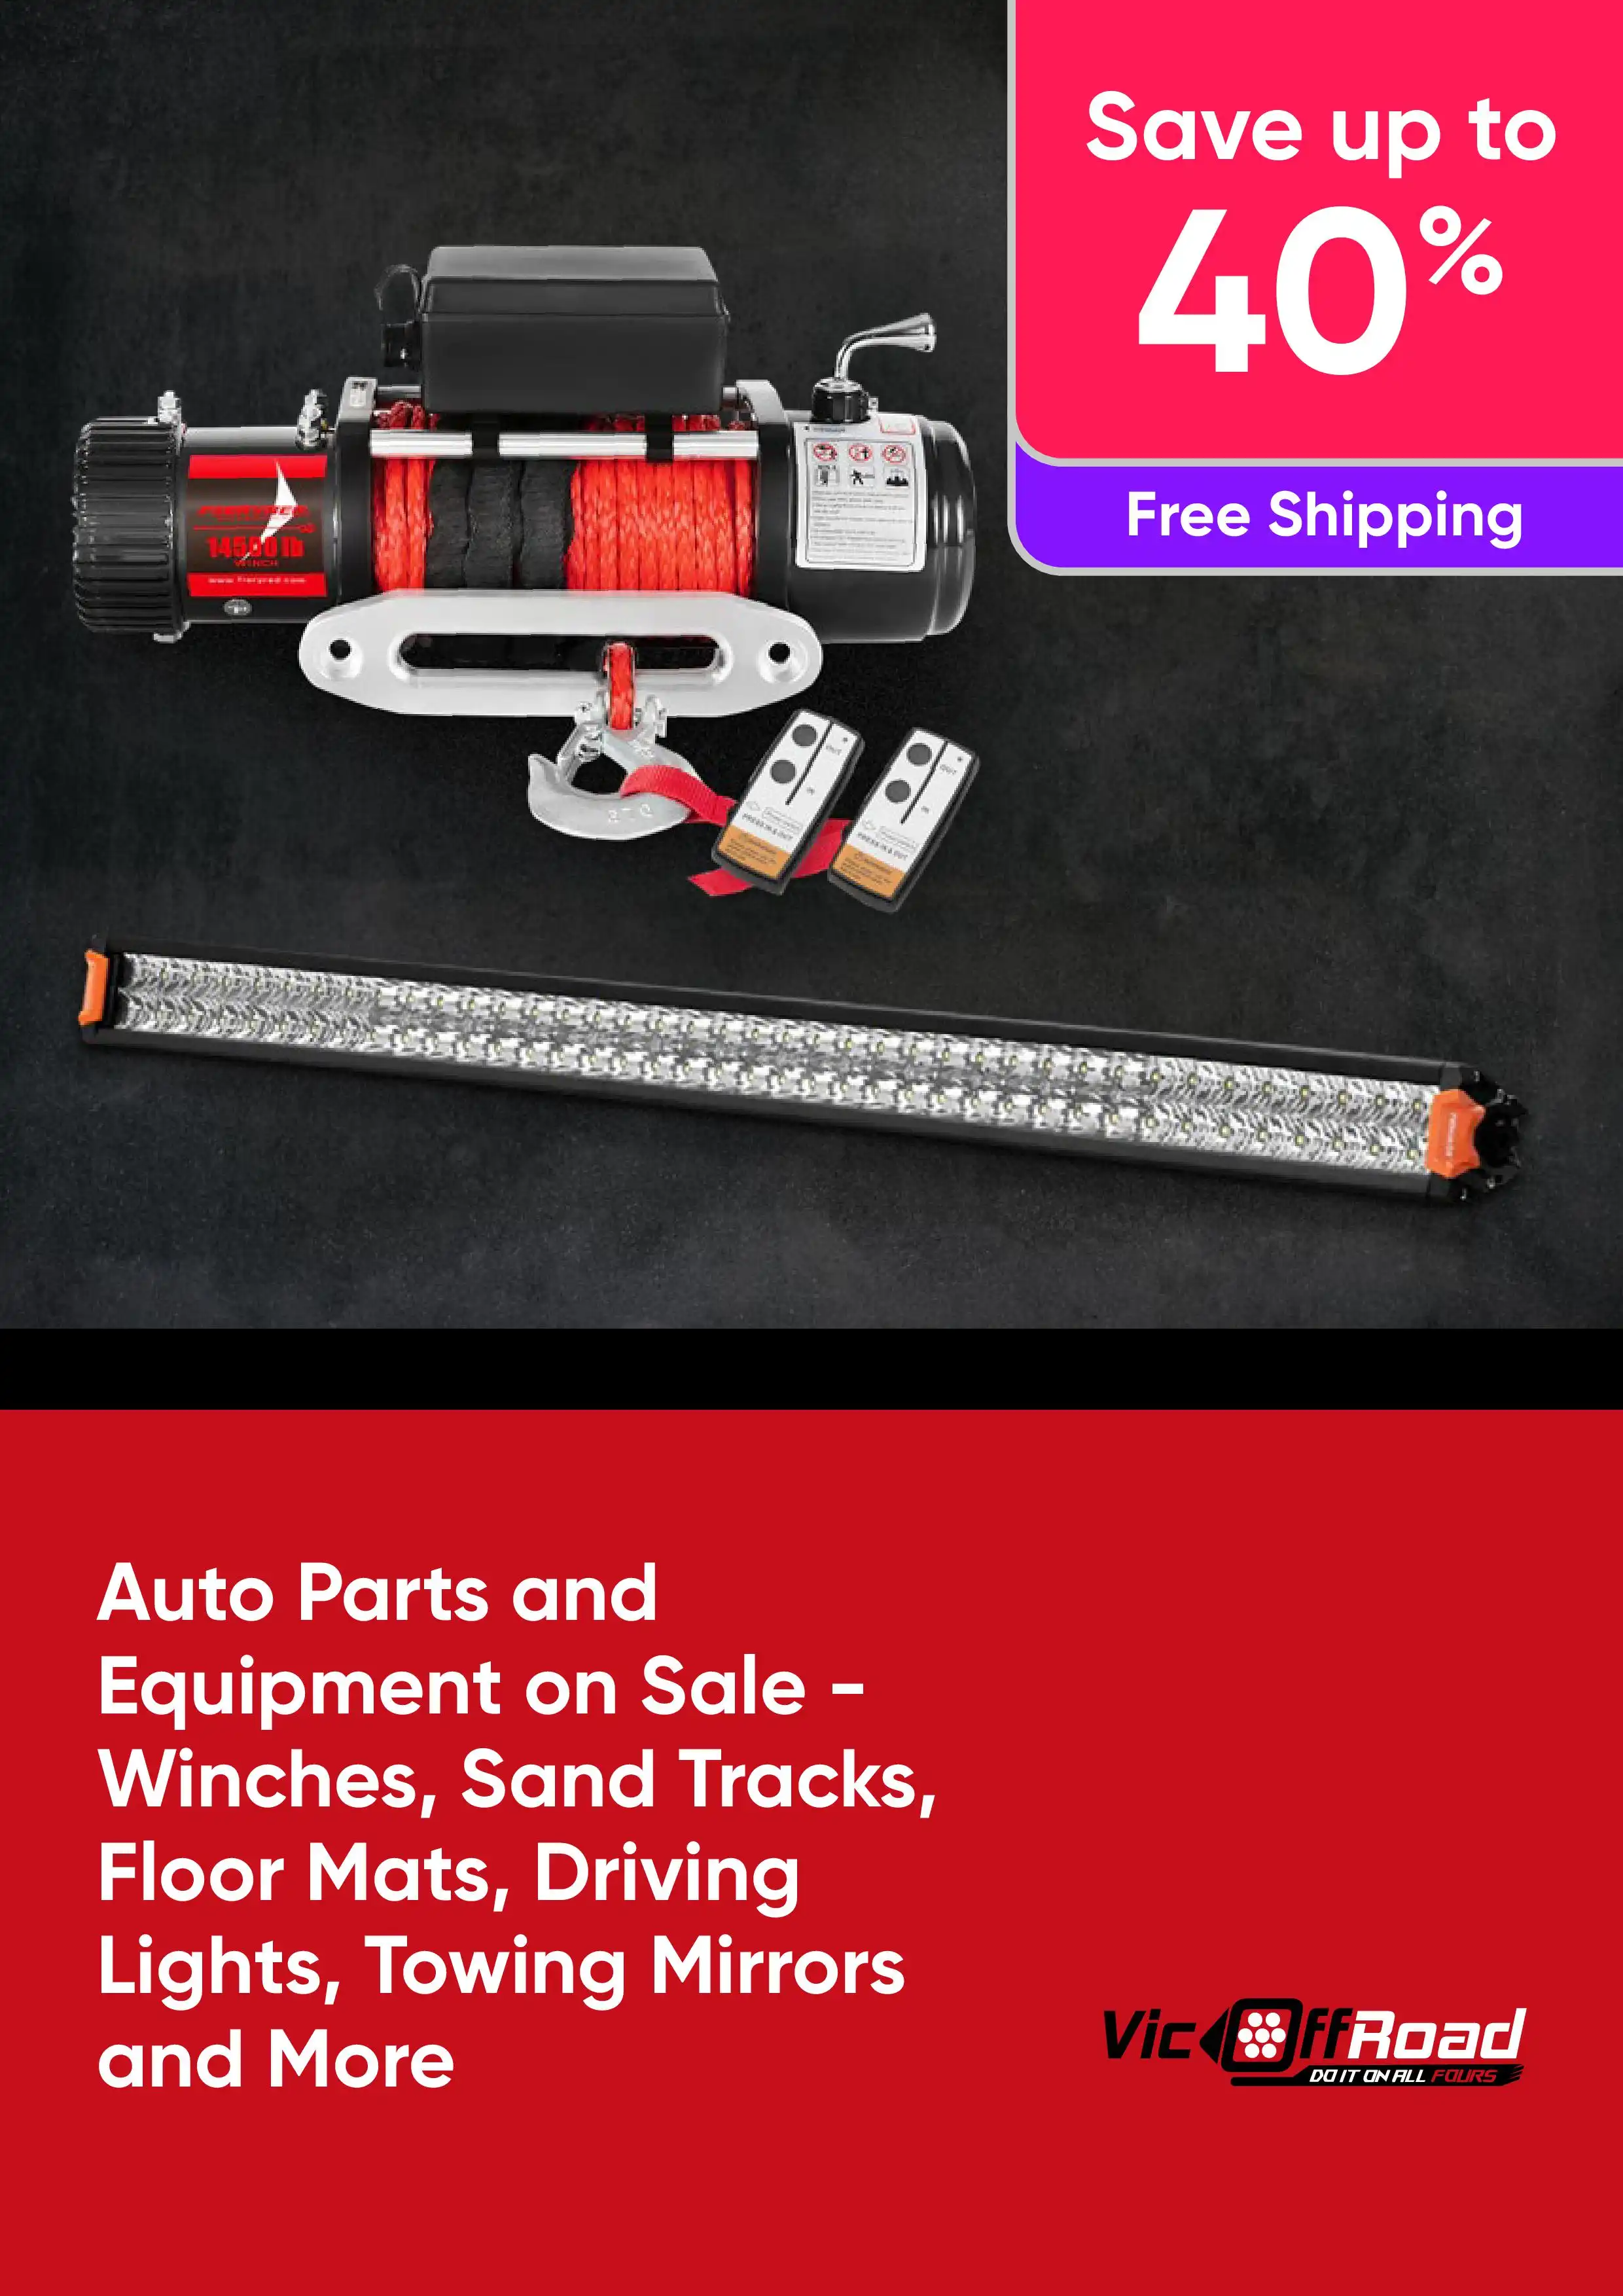 Auto Parts and Equipment on Sale - Winches, Sand Tracks, Floor Mats, Driving Lights, Towing Mirrors and More  - Save up to 40% off